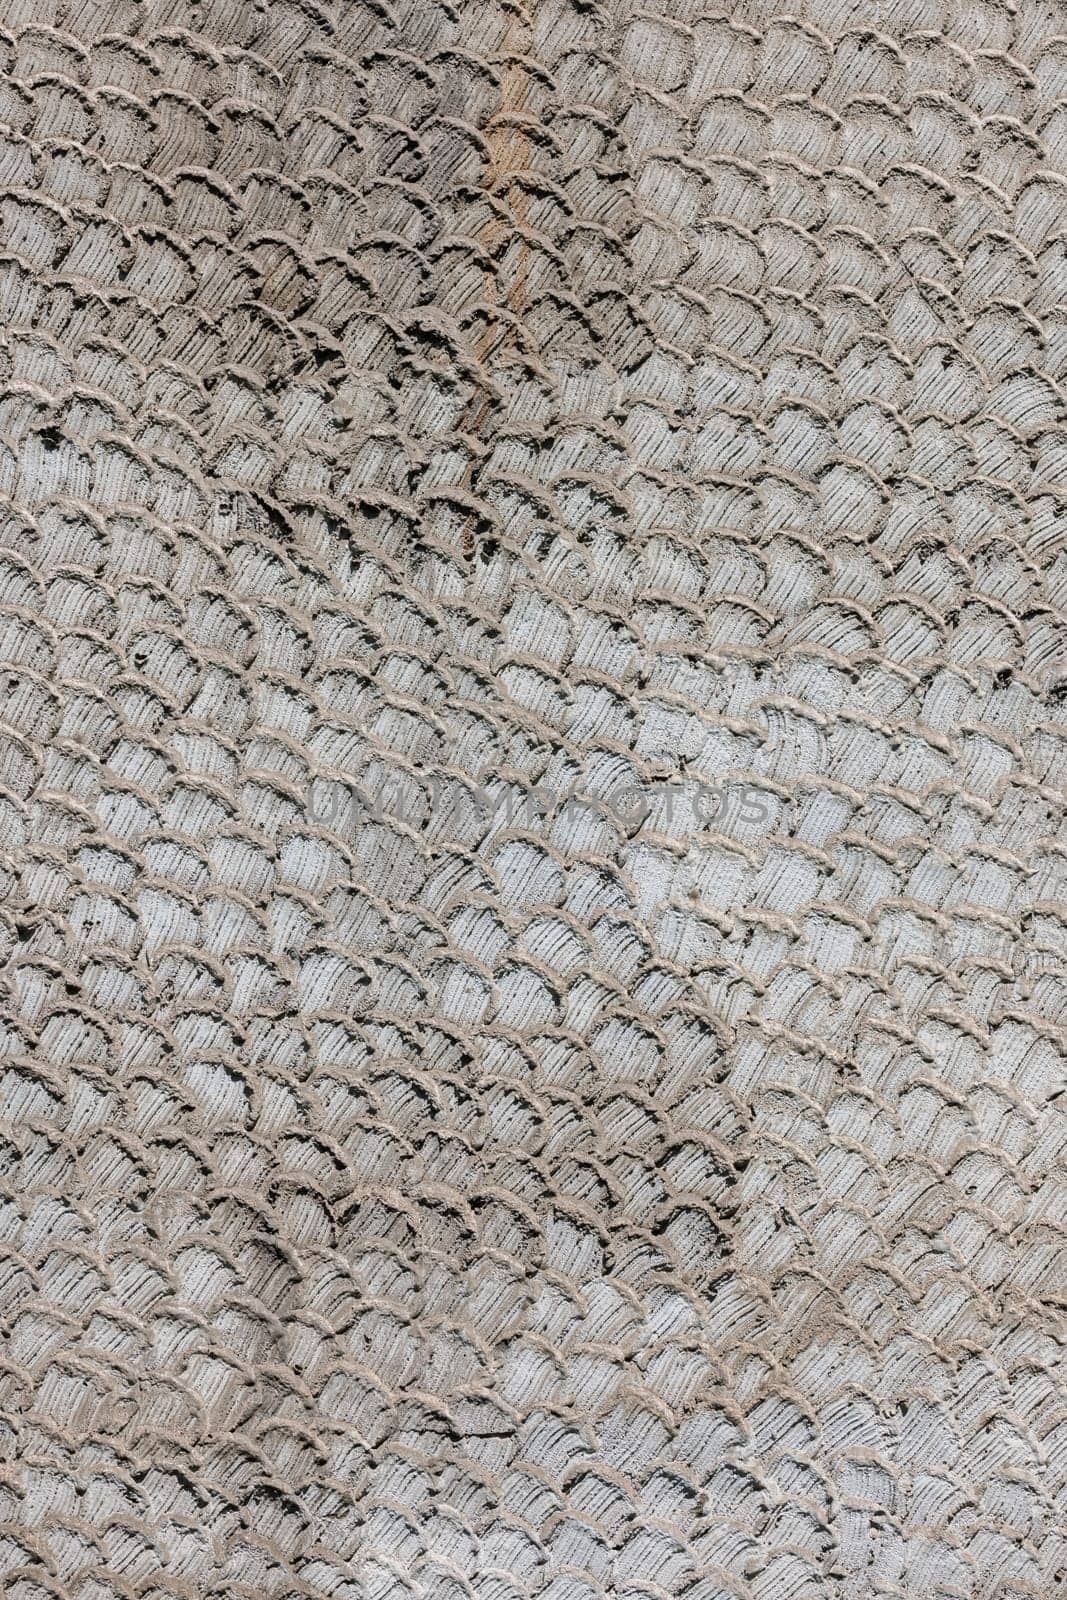 Closeup of grey snakeskin or fish scale pattern finish on gray concrete wall by z1b